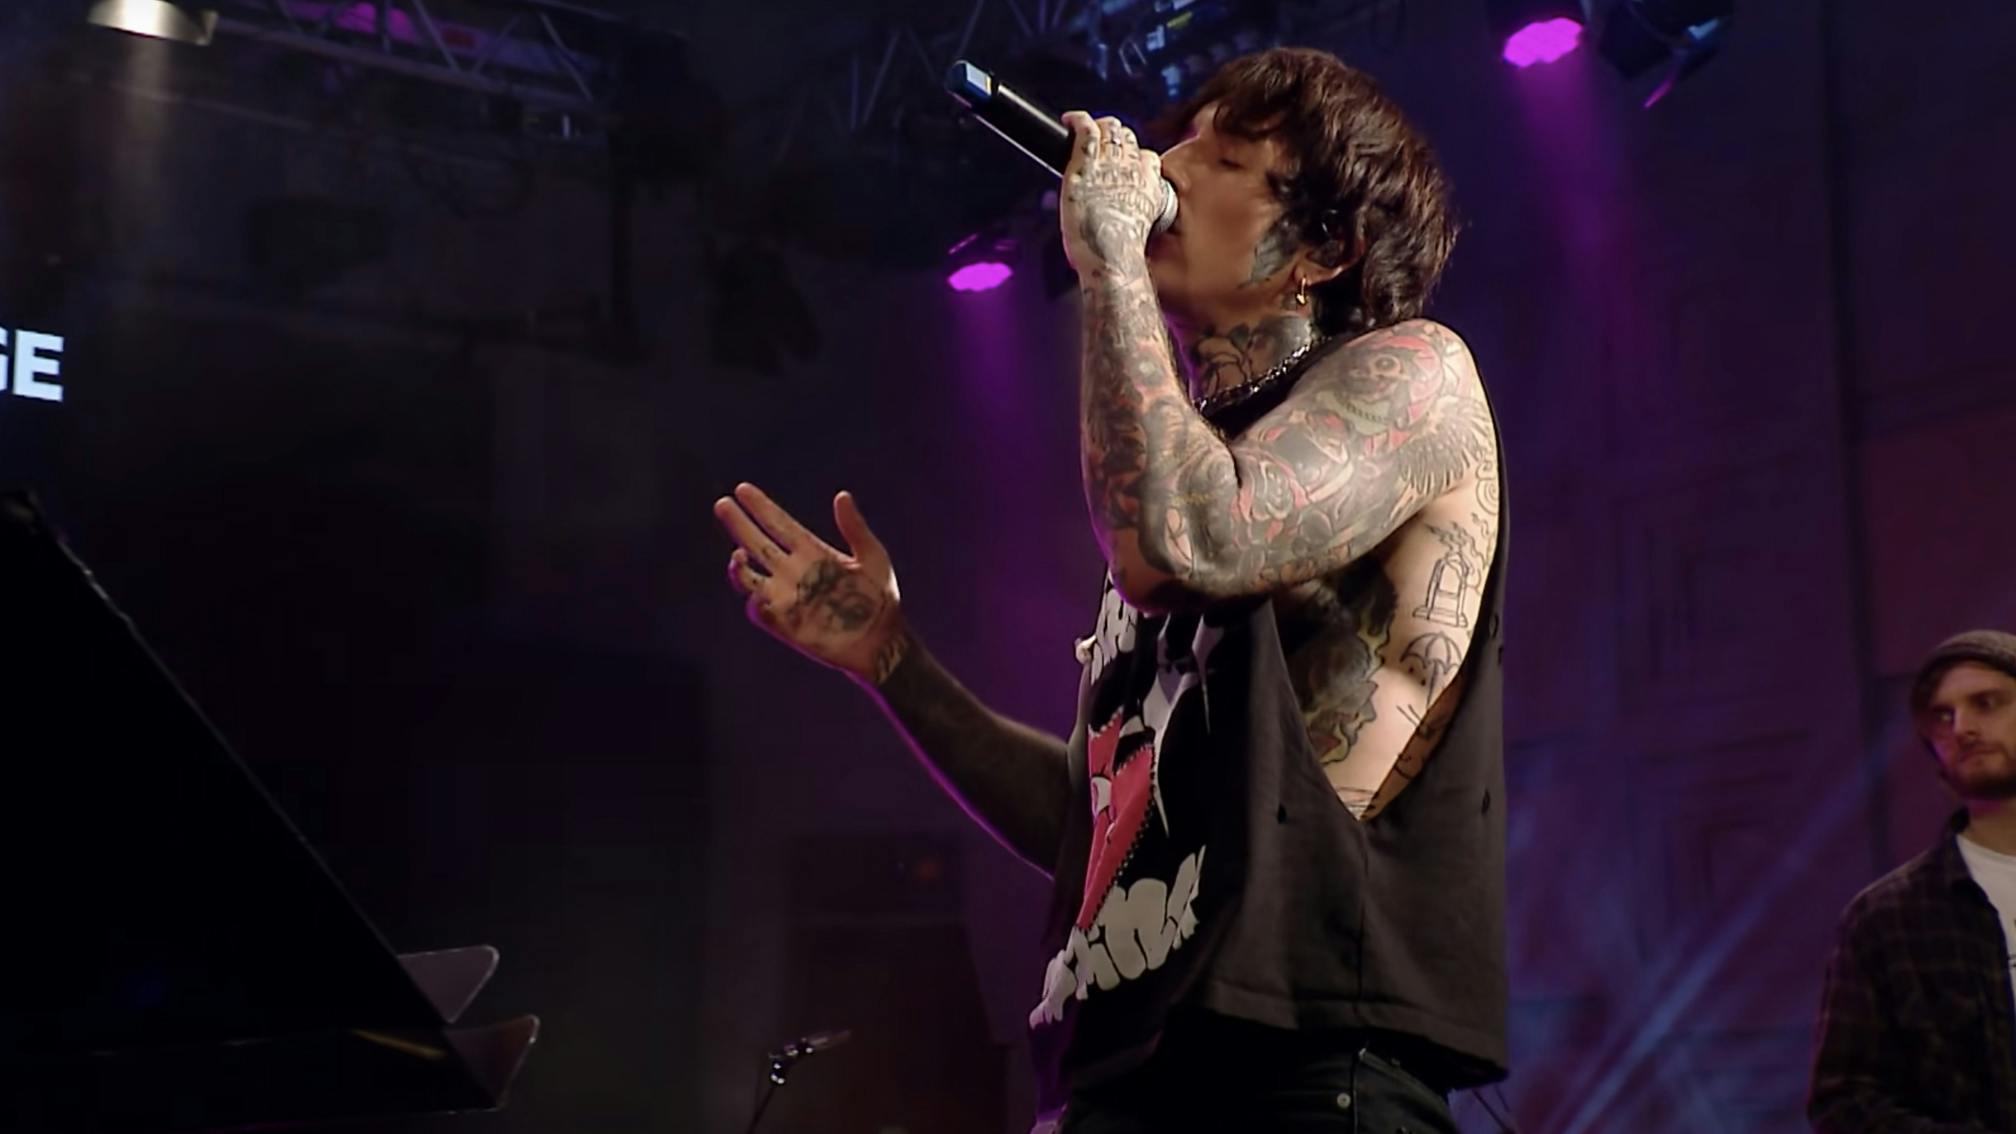 Bring Me The Horizon cover 24kGoldn and iann dior’s Mood in Radio 1's Live Lounge